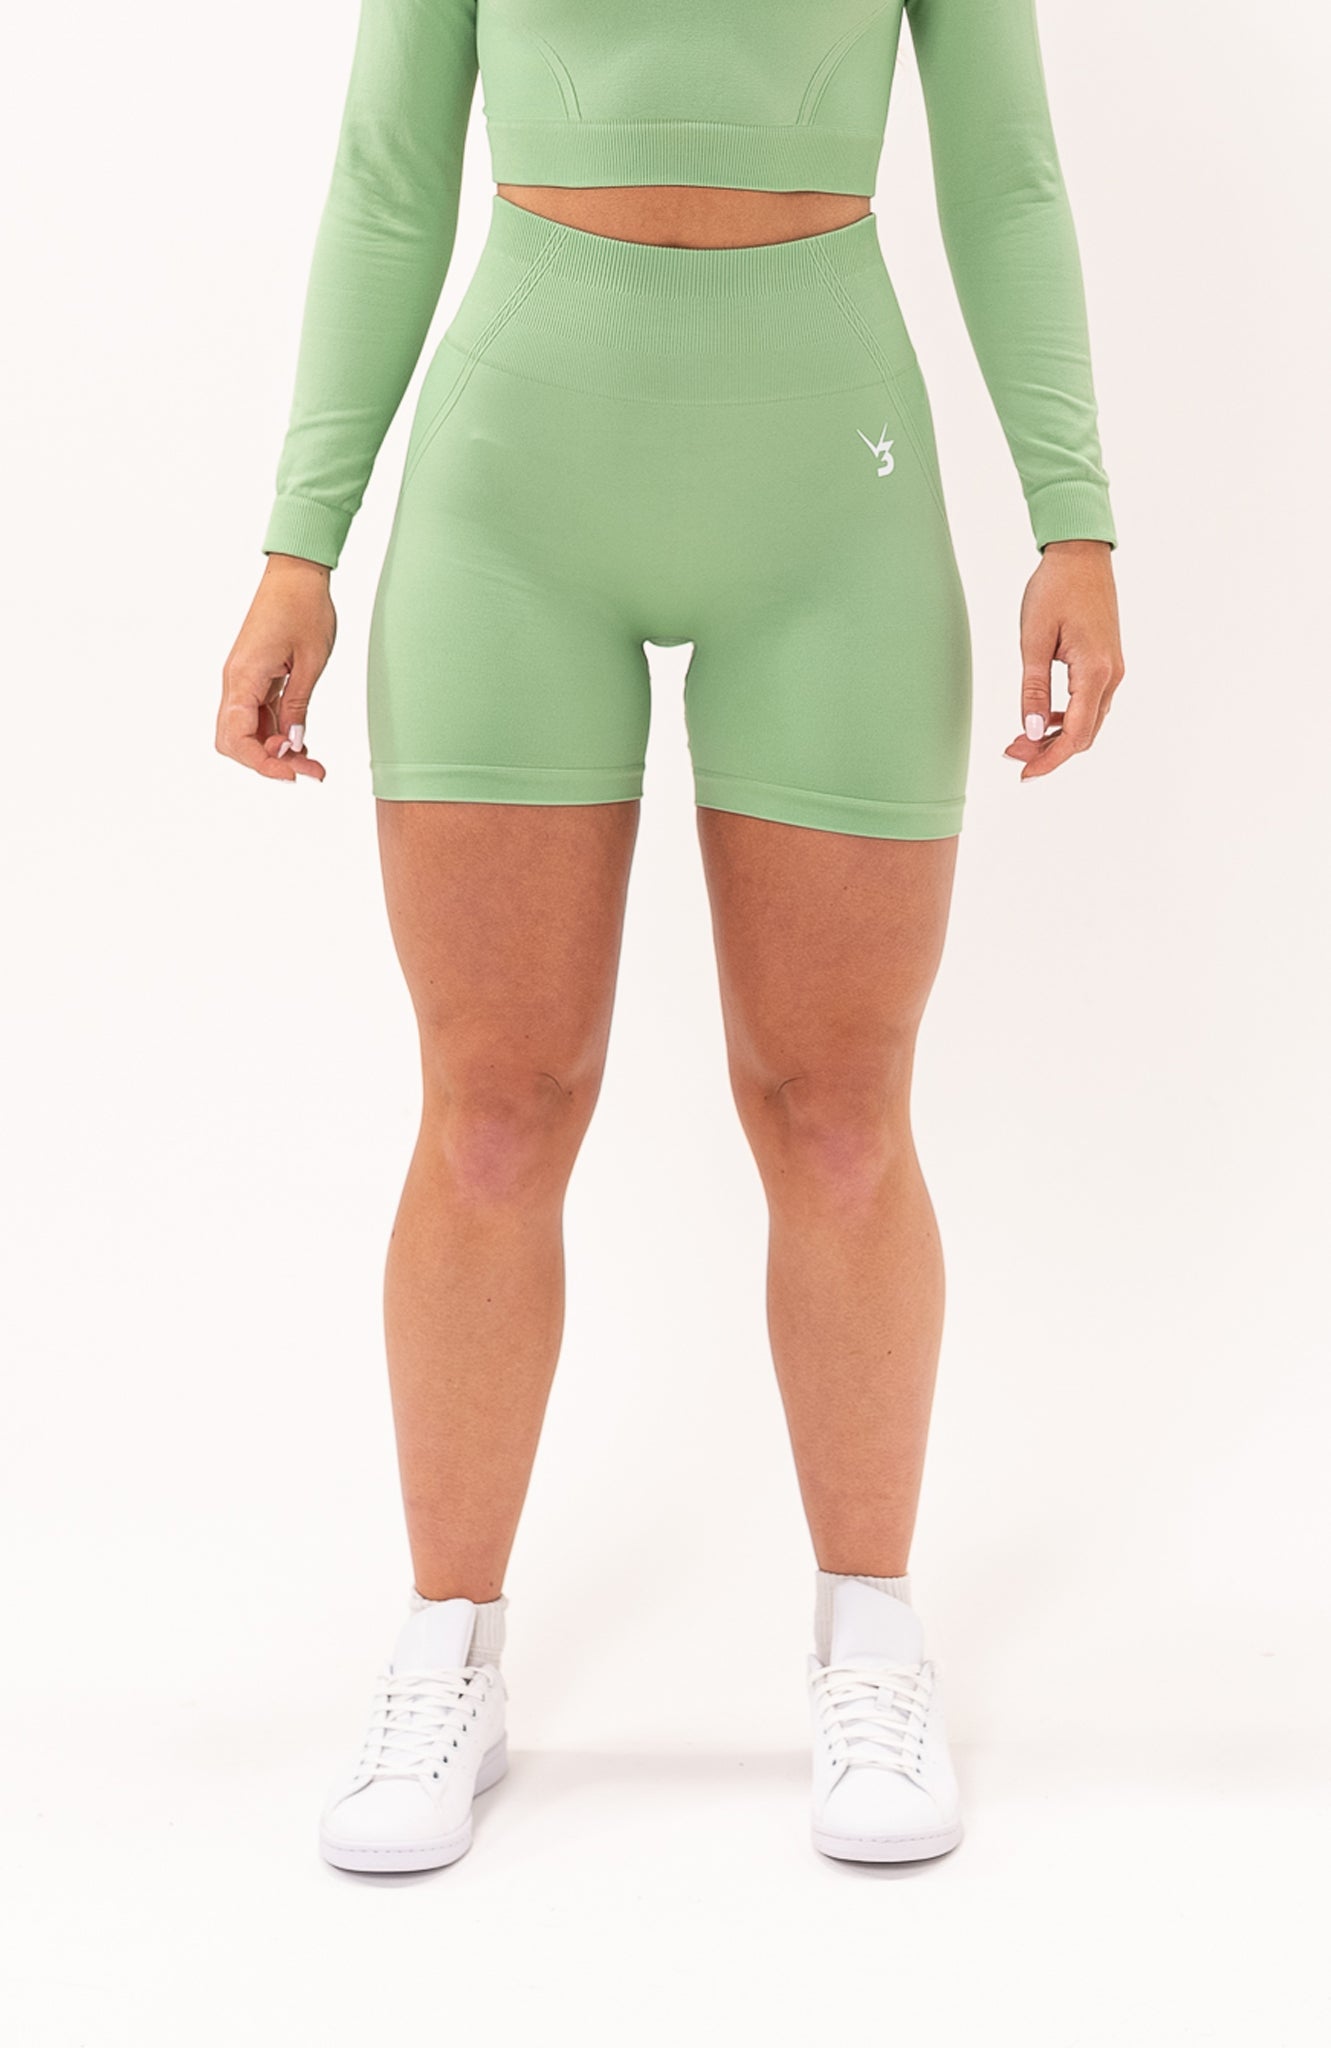 V3 Apparel Women's Tempo seamless scrunch bum shaping high waisted cycle shorts in mint green – Squat proof 5 inch leg gym shorts for workouts training, Running, yoga, bodybuilding and bikini fitness.